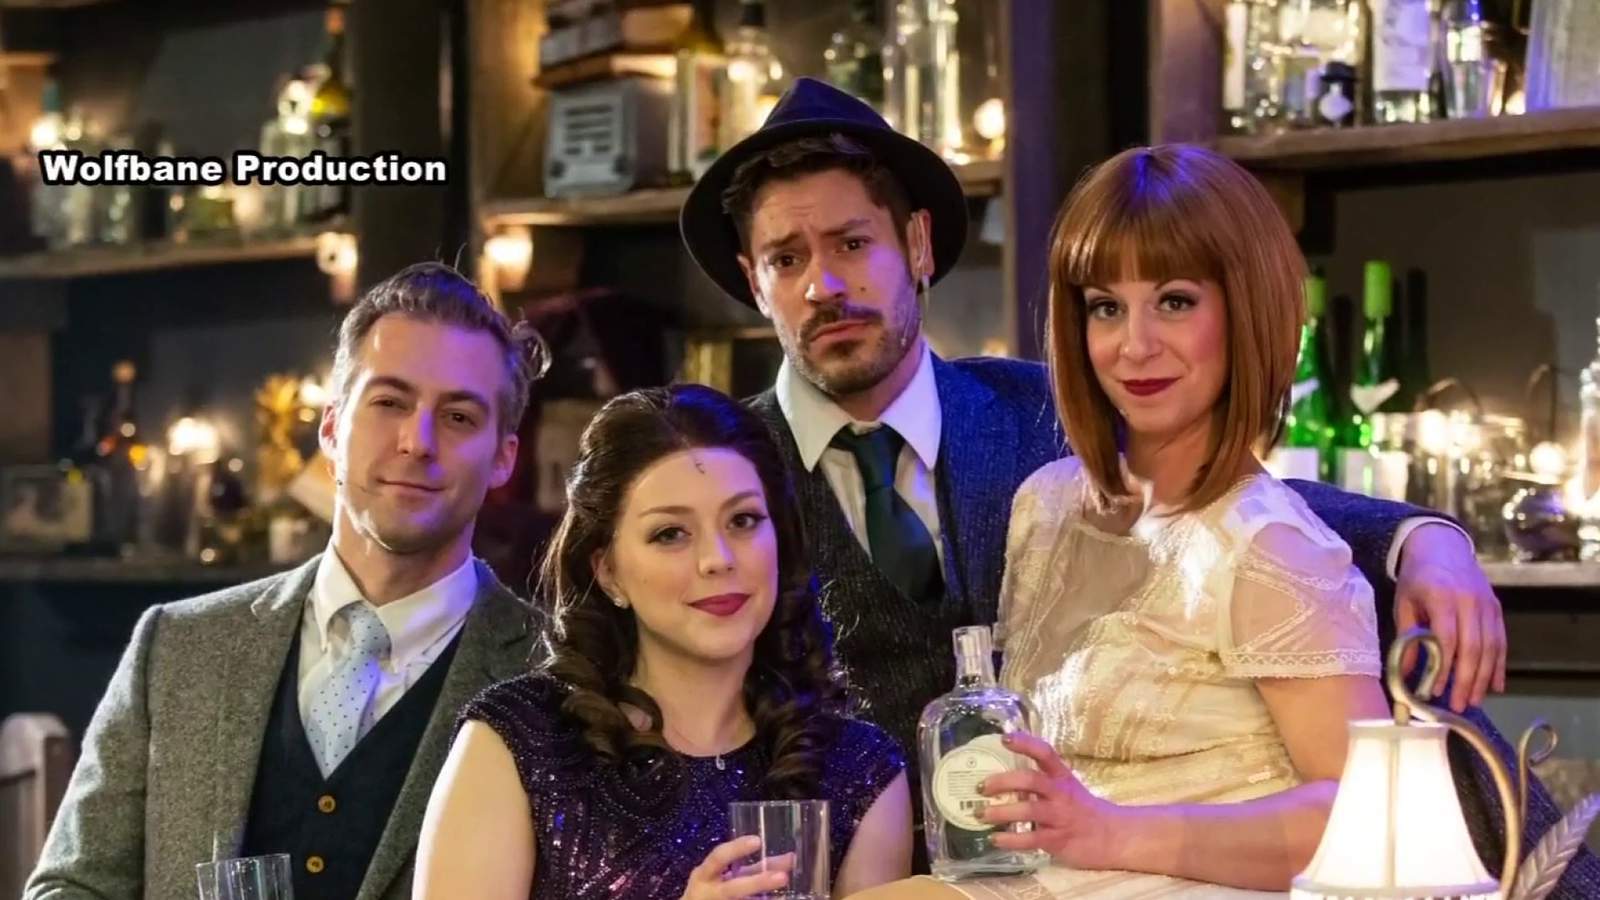 Wolfbane Productions’ takes audiences back to roaring 1920s during ‘Guys and Dolls’